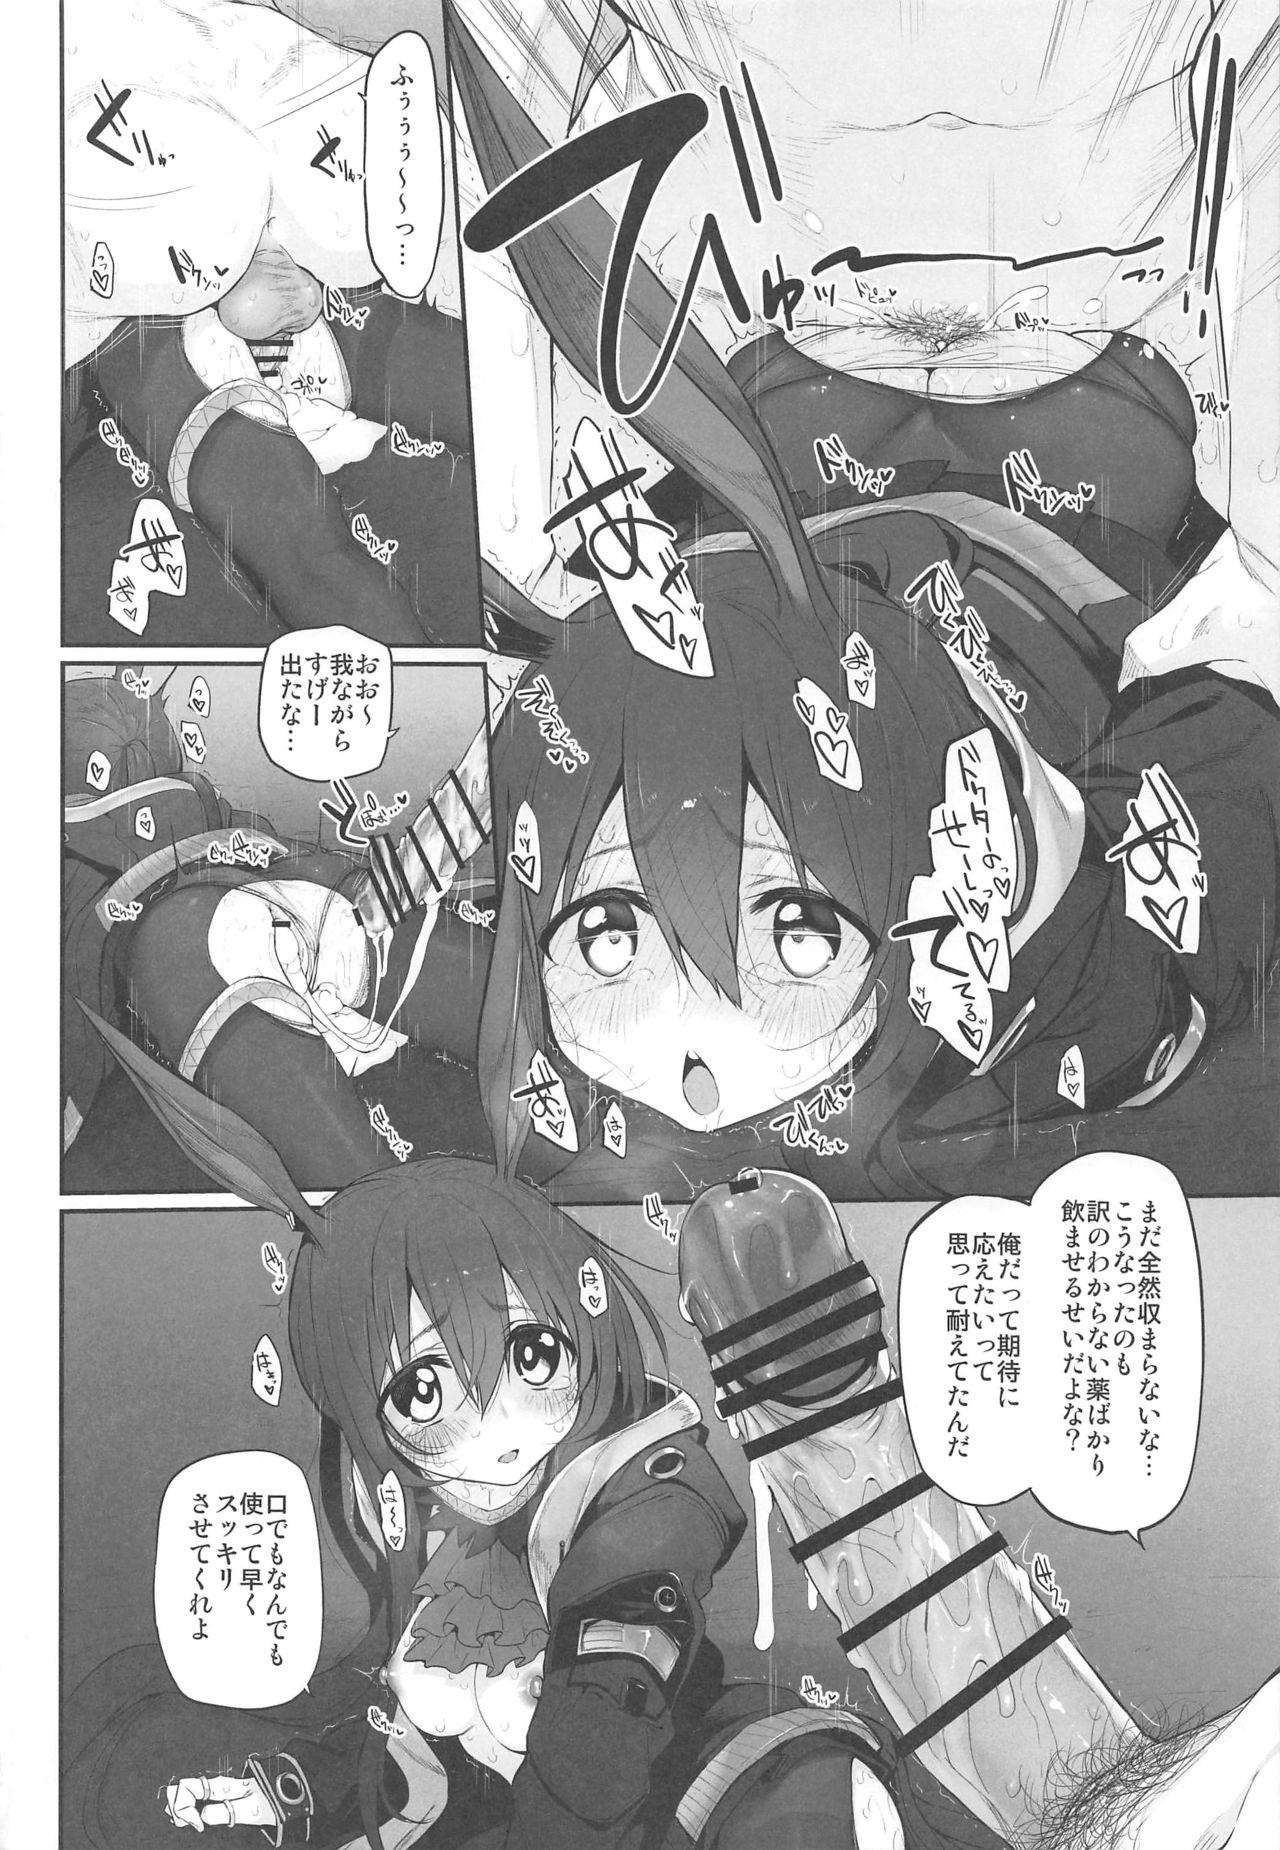 Cougar Risei/zEro Marked girls Vol. 23 - Arknights Gorgeous - Page 11